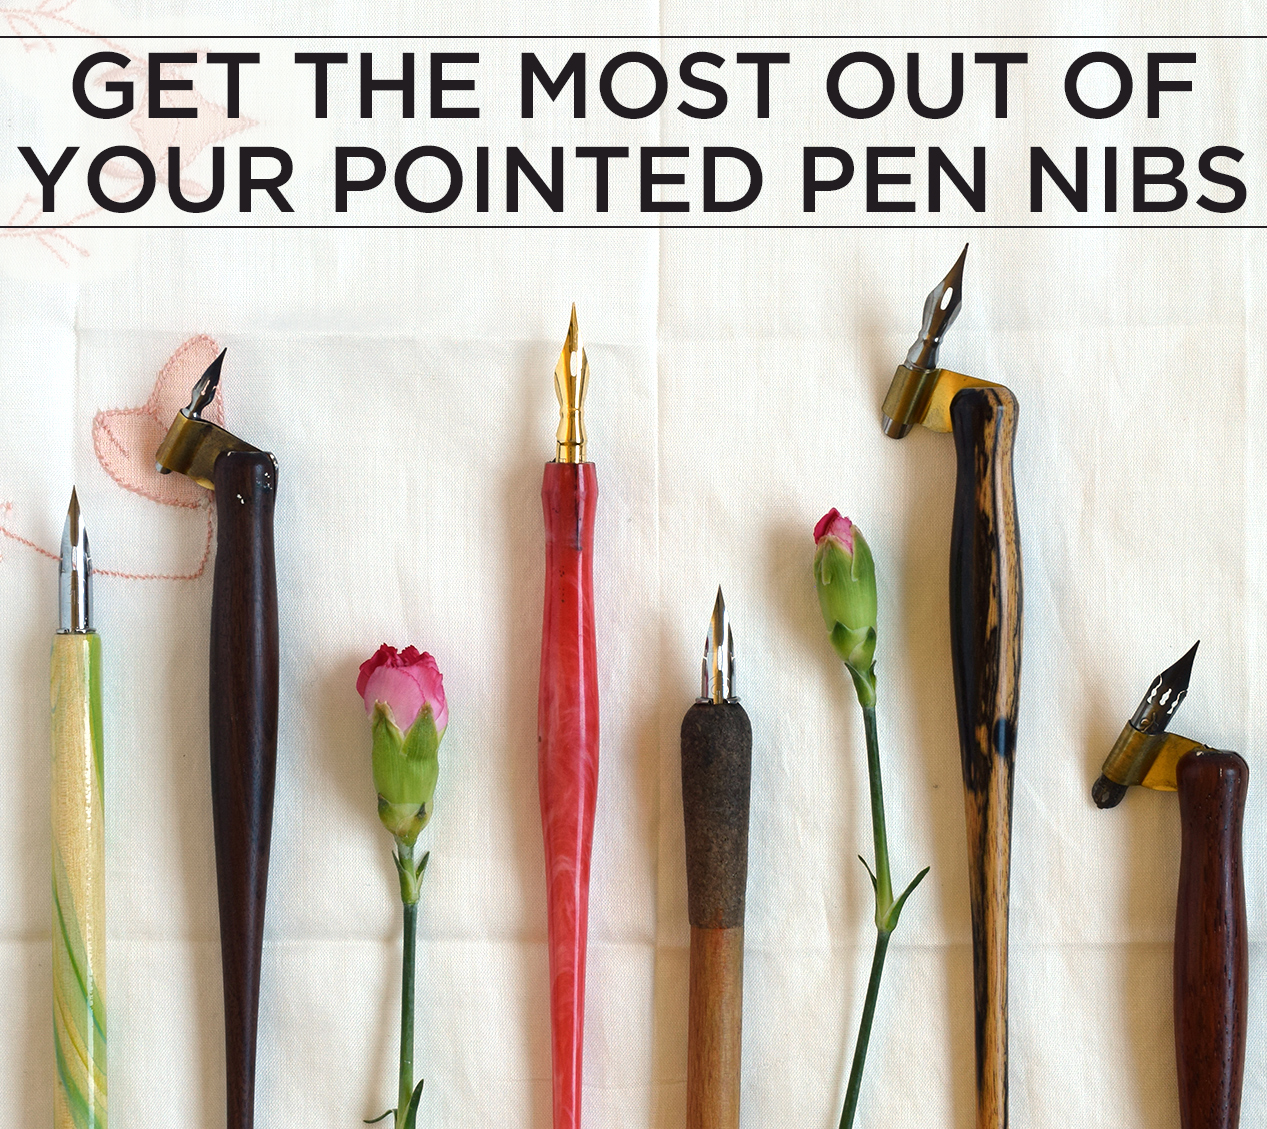 How to Get the Most Out of Your Pointed Pen Nibs